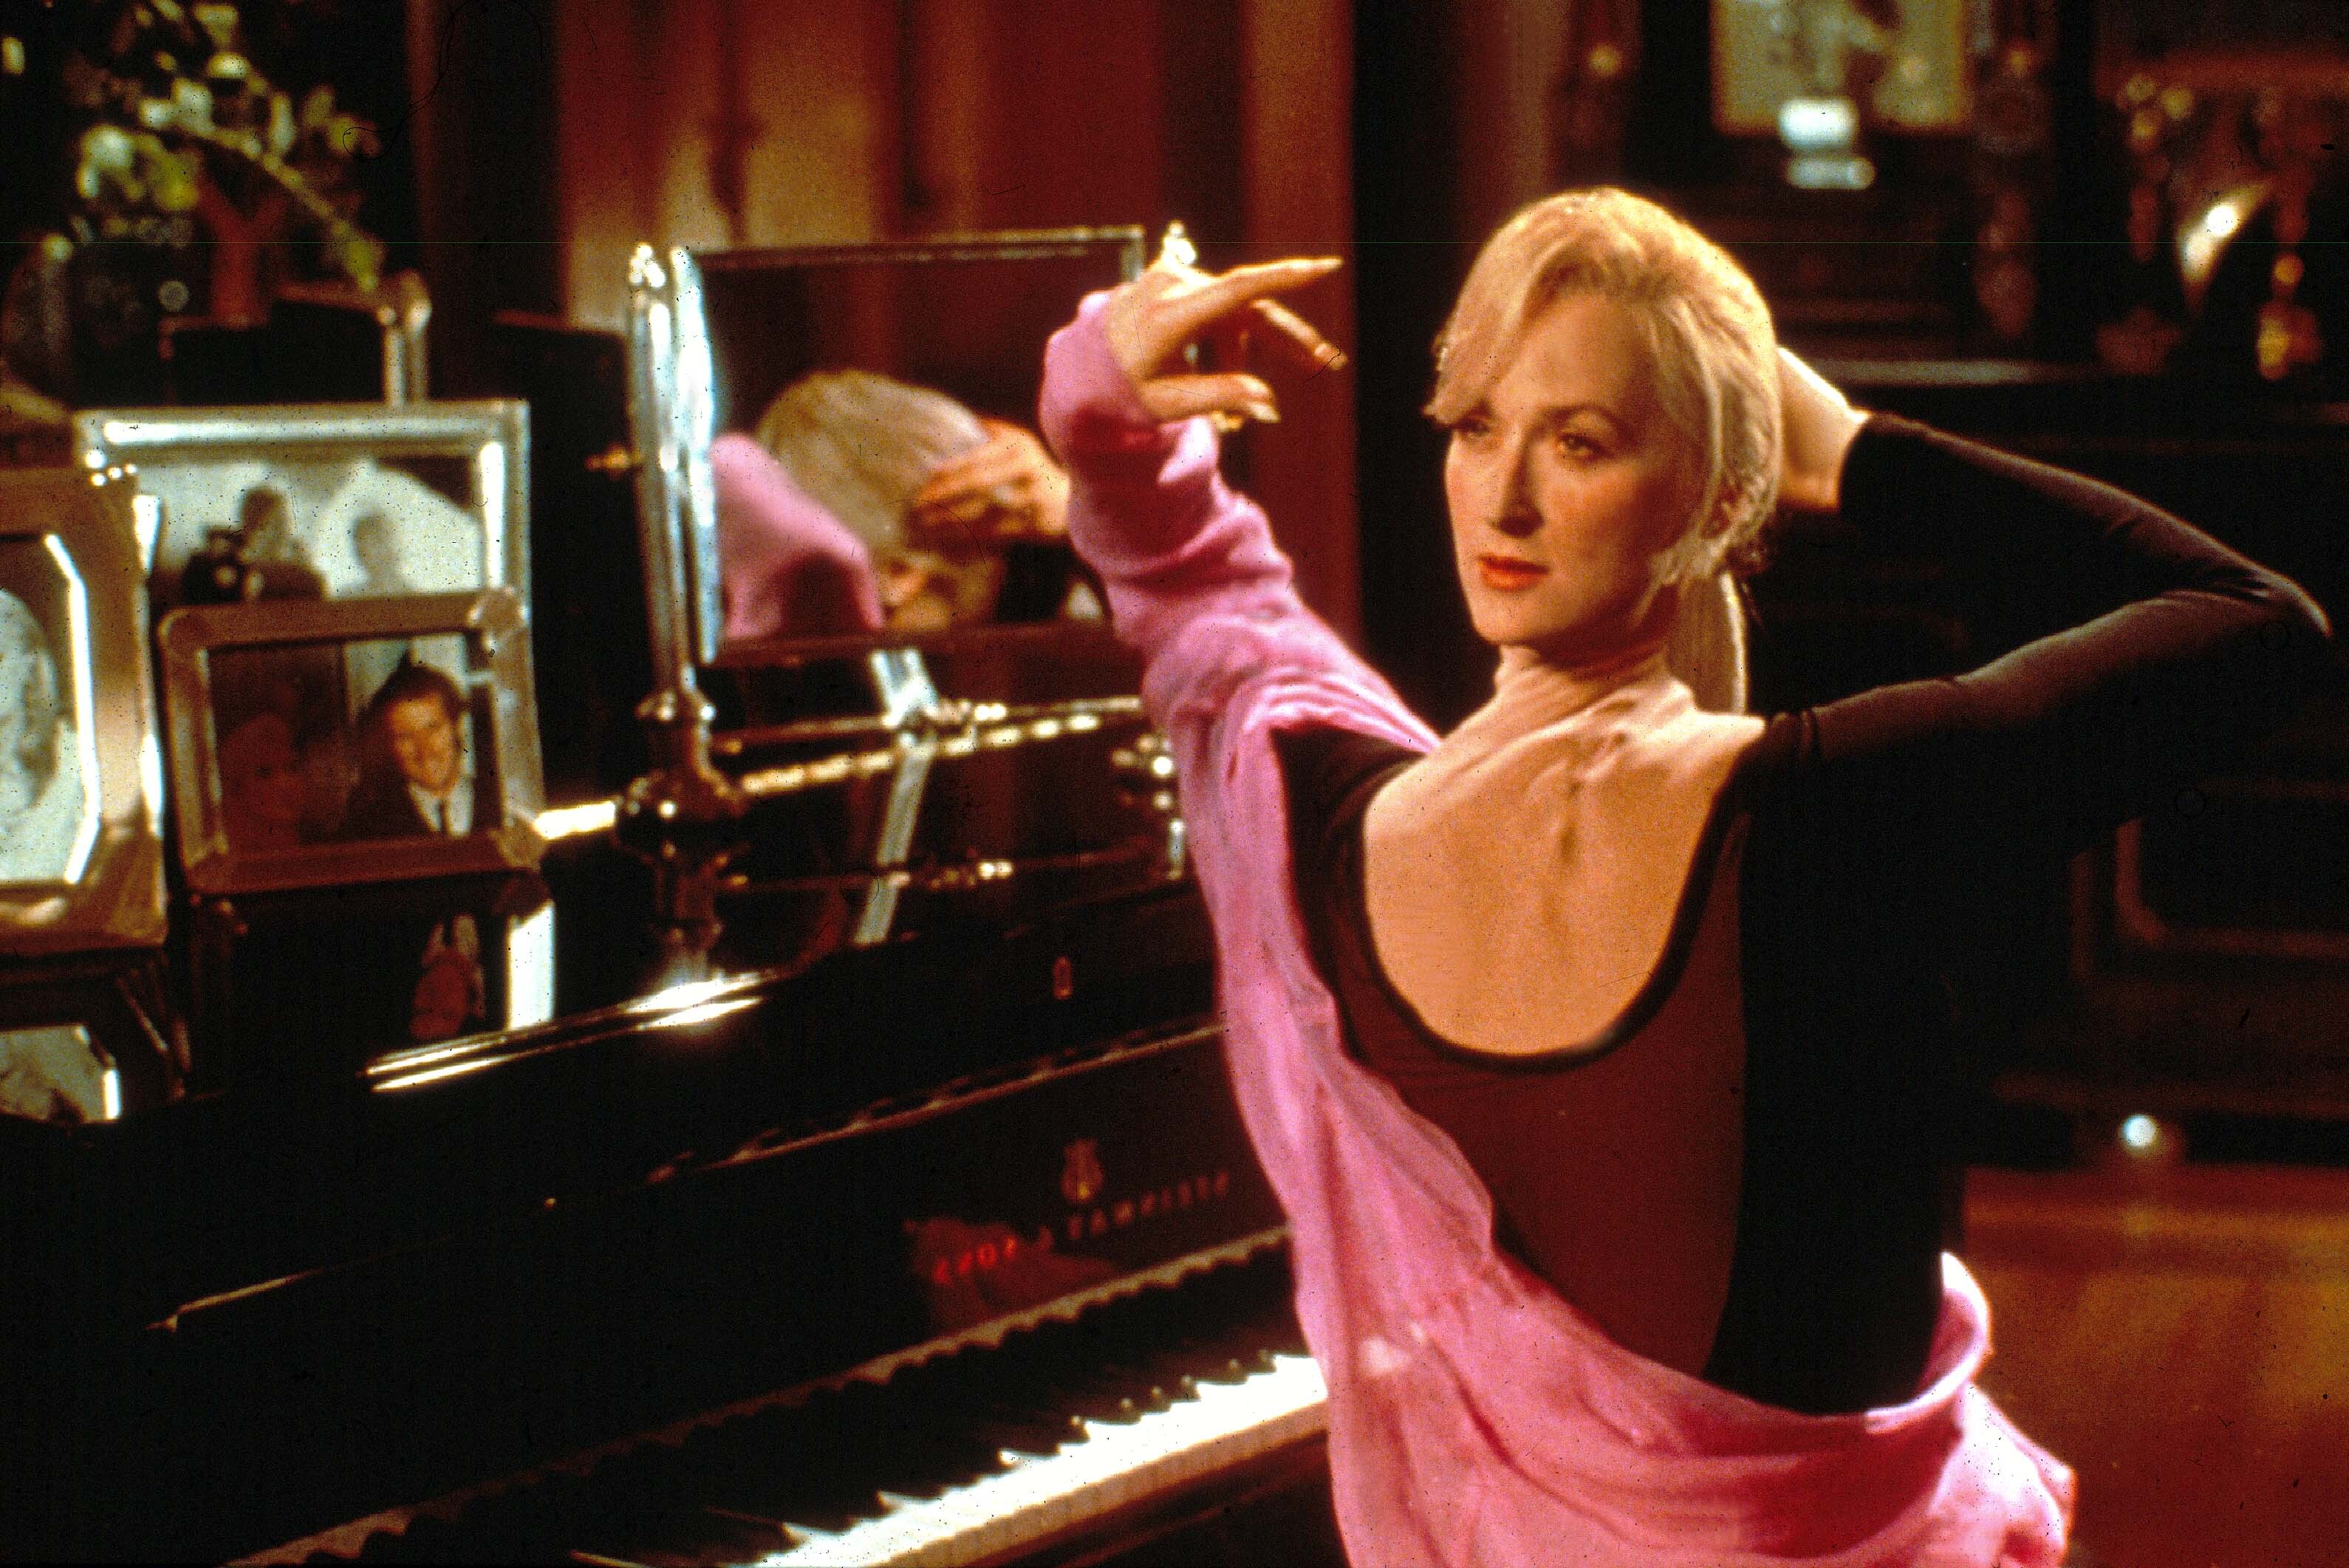 Kim was compared to Meryl Streep in Death Becomes Her